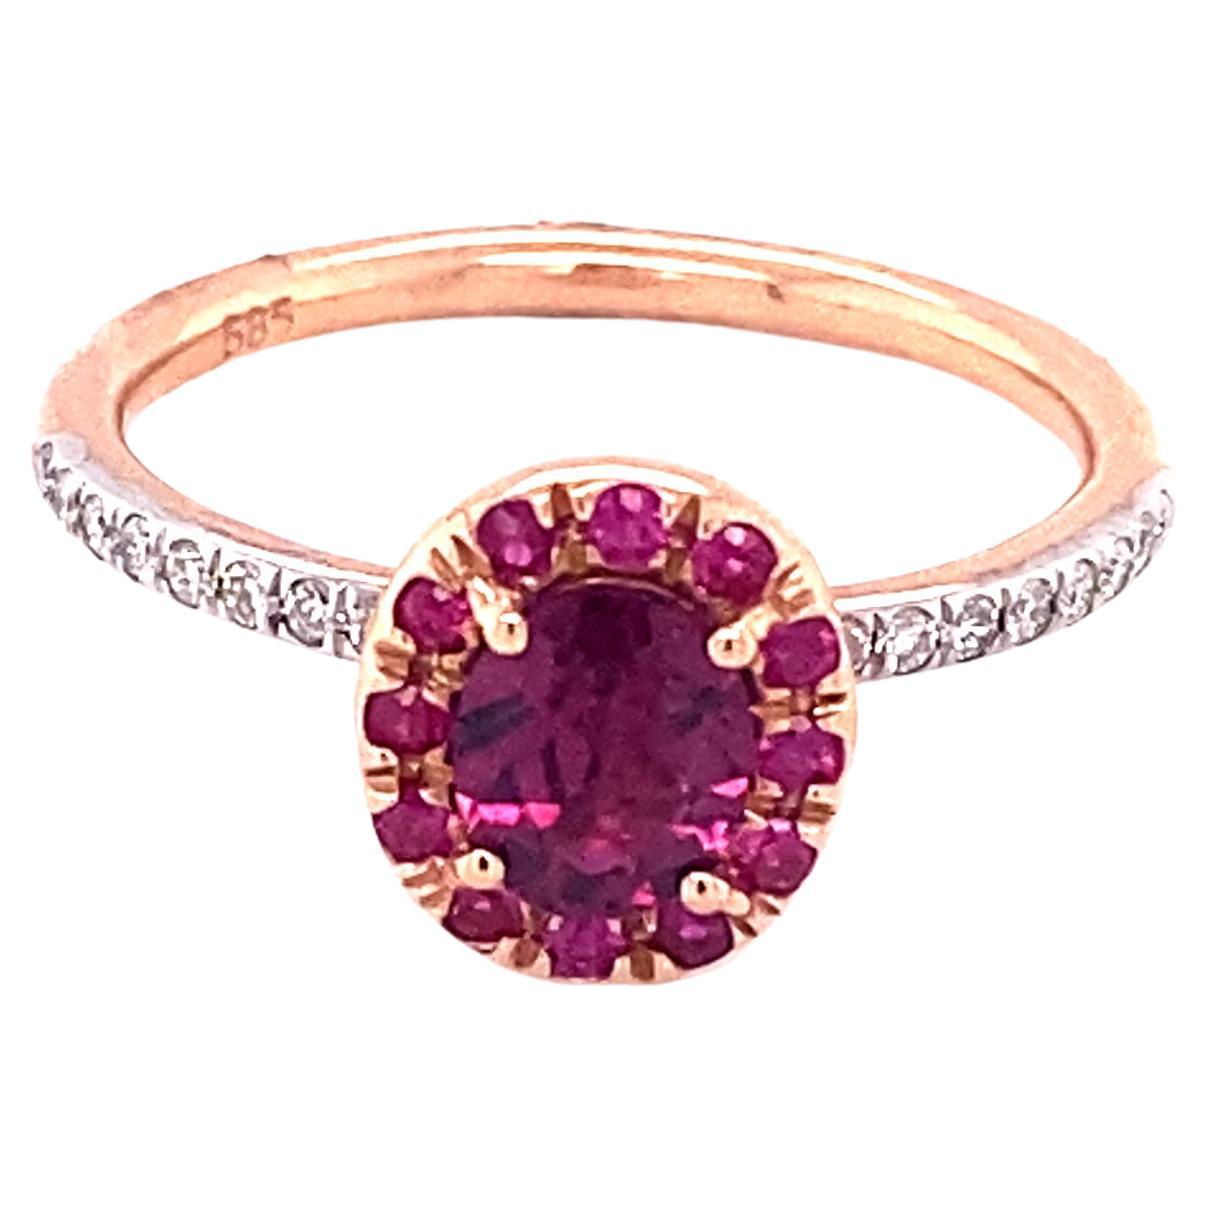 A ring with garnet, ruby, and diamonds? I think it is a beautiful combination of gemstones! That is exactly what we did with this ring! The center stone is a purple garnet, the halo has marvelous red rubies, and the shank has amazing white diamonds!